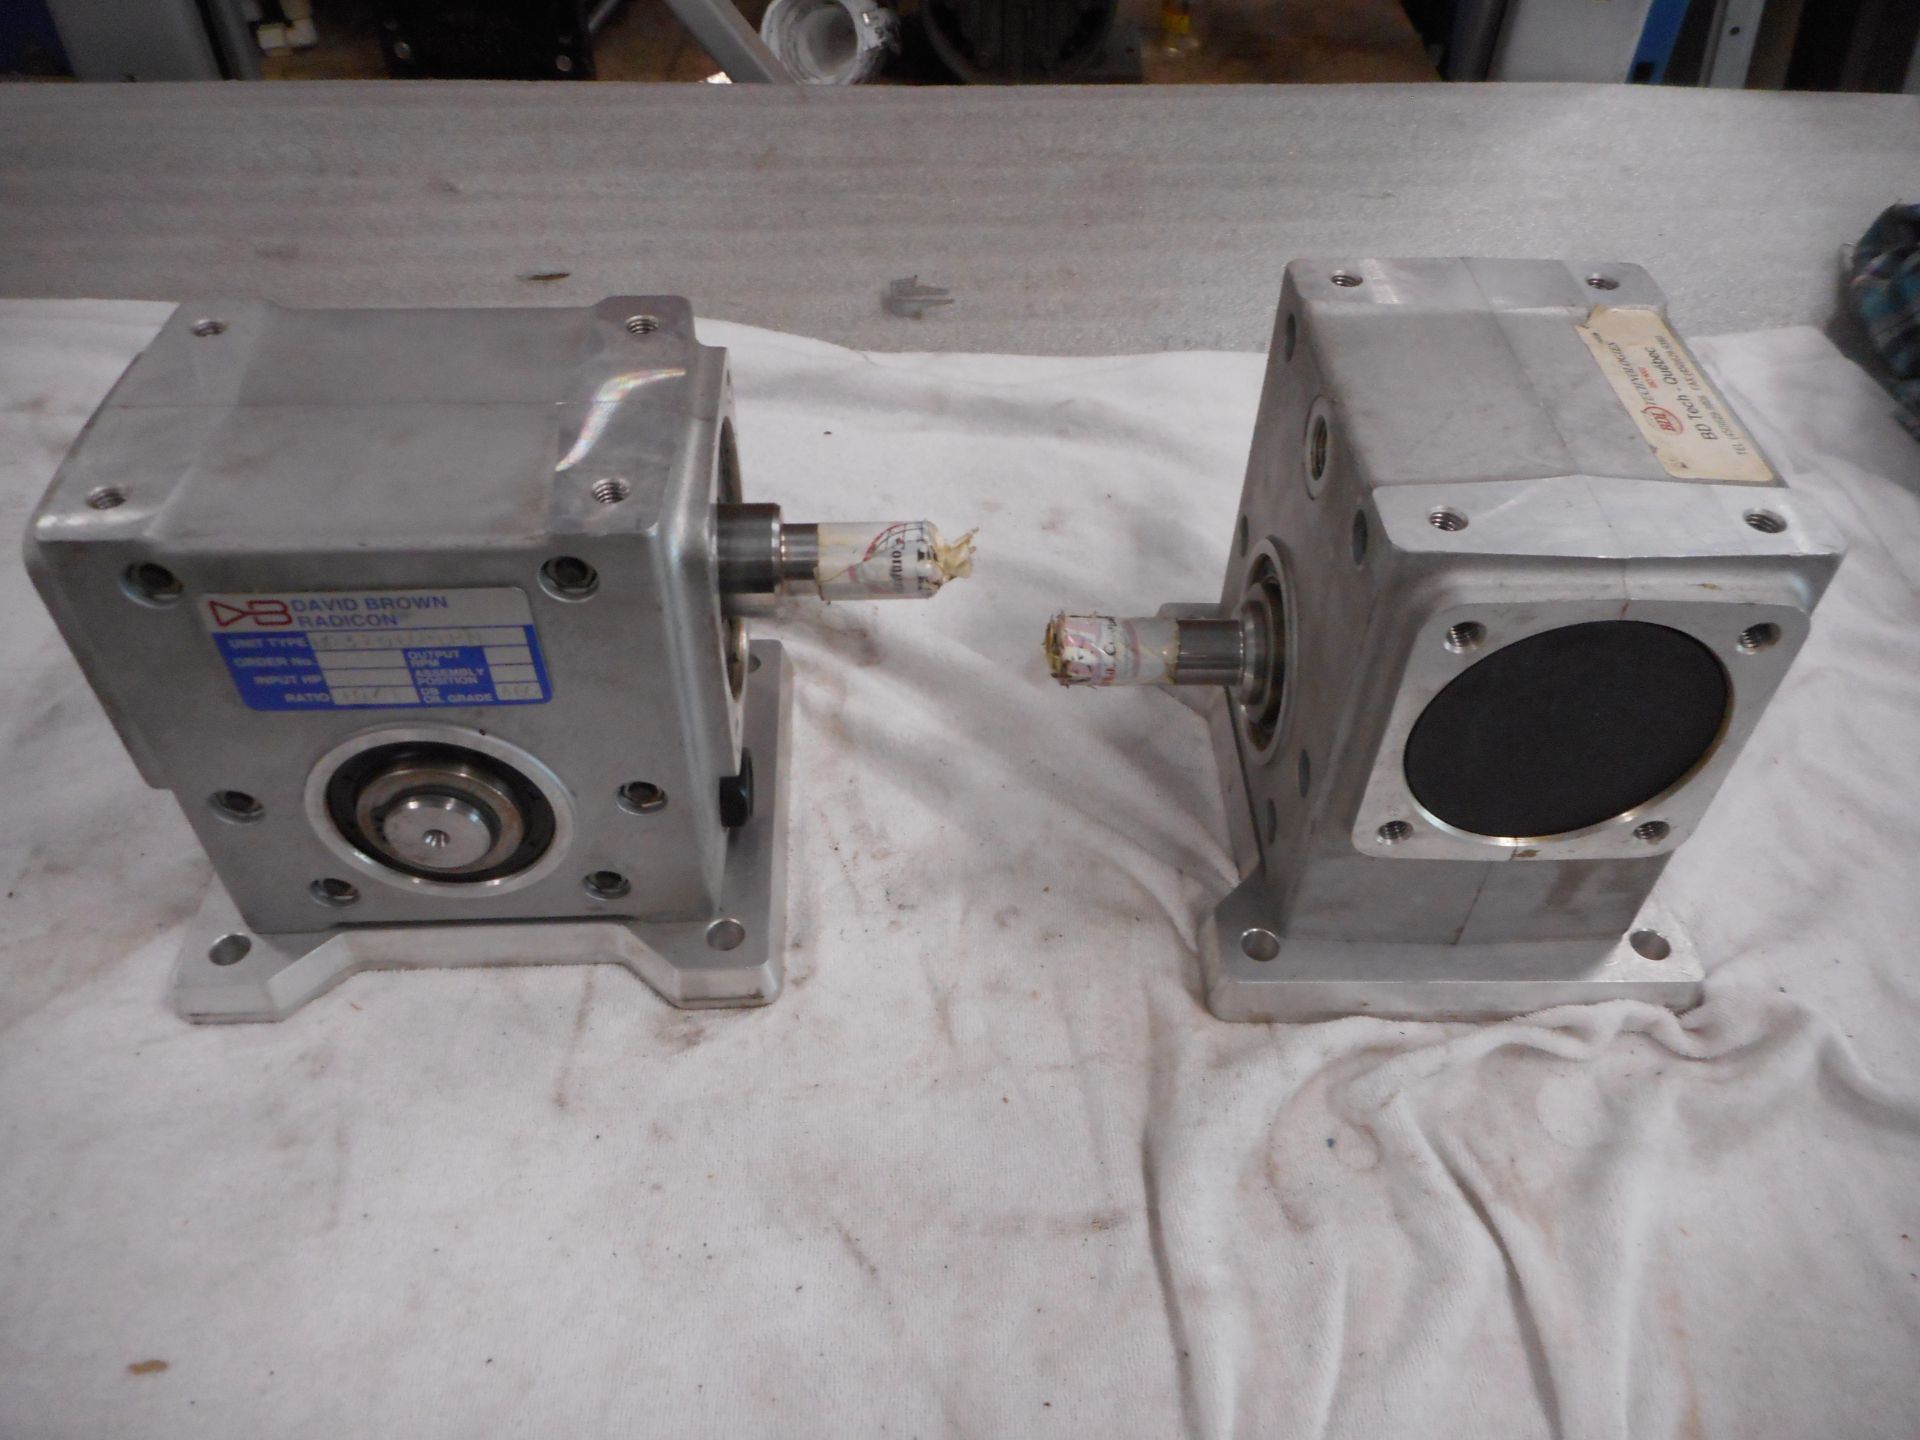 Lot of 2 David Brown Radicon STAINLESS STEEL Gearbox